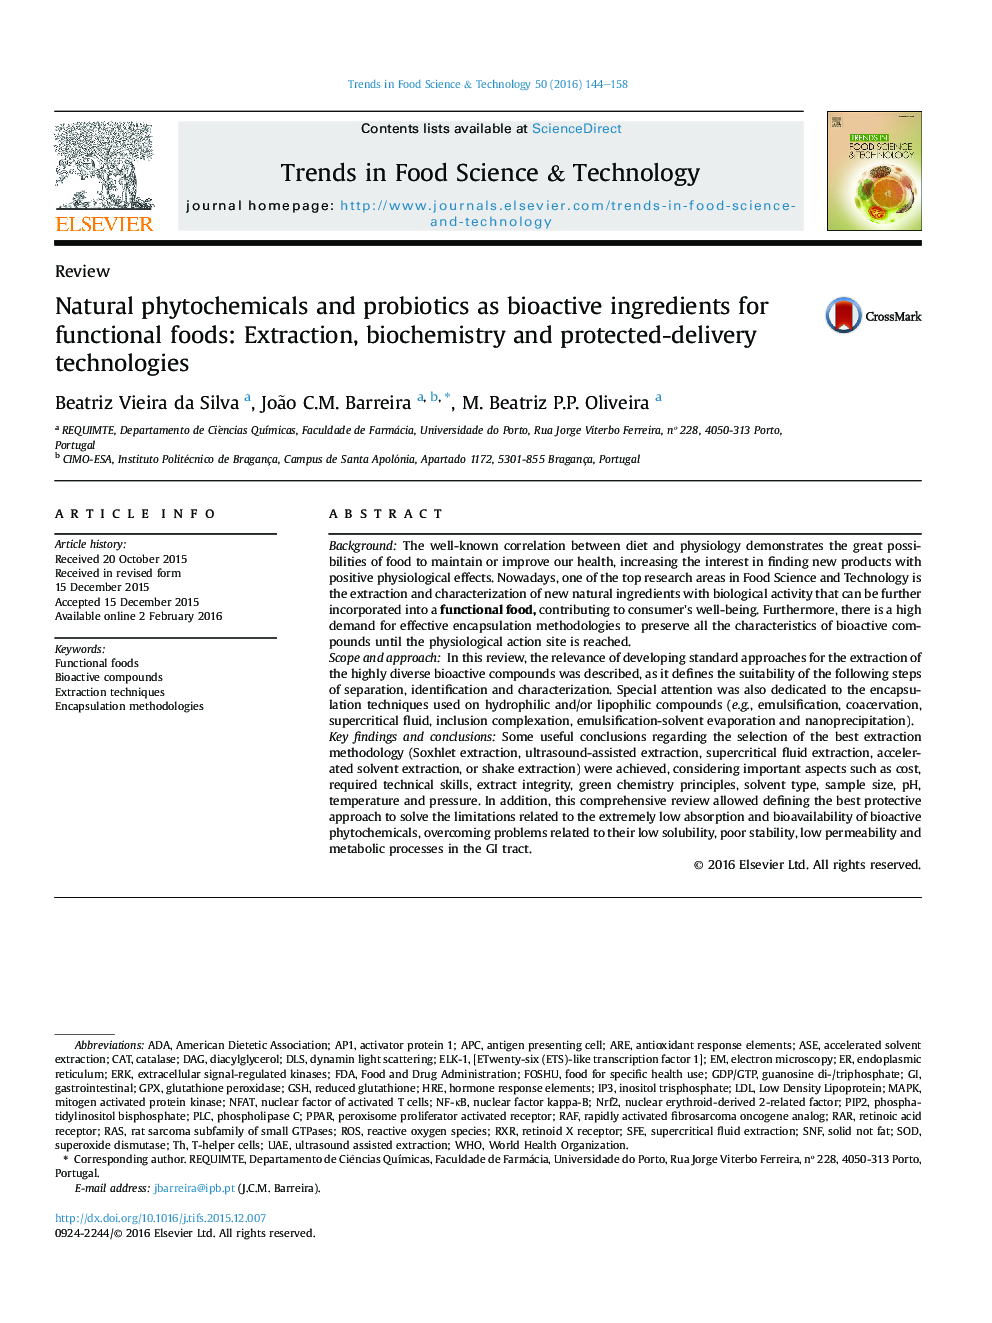 Natural phytochemicals and probiotics as bioactive ingredients for functional foods: Extraction, biochemistry and protected-delivery technologies